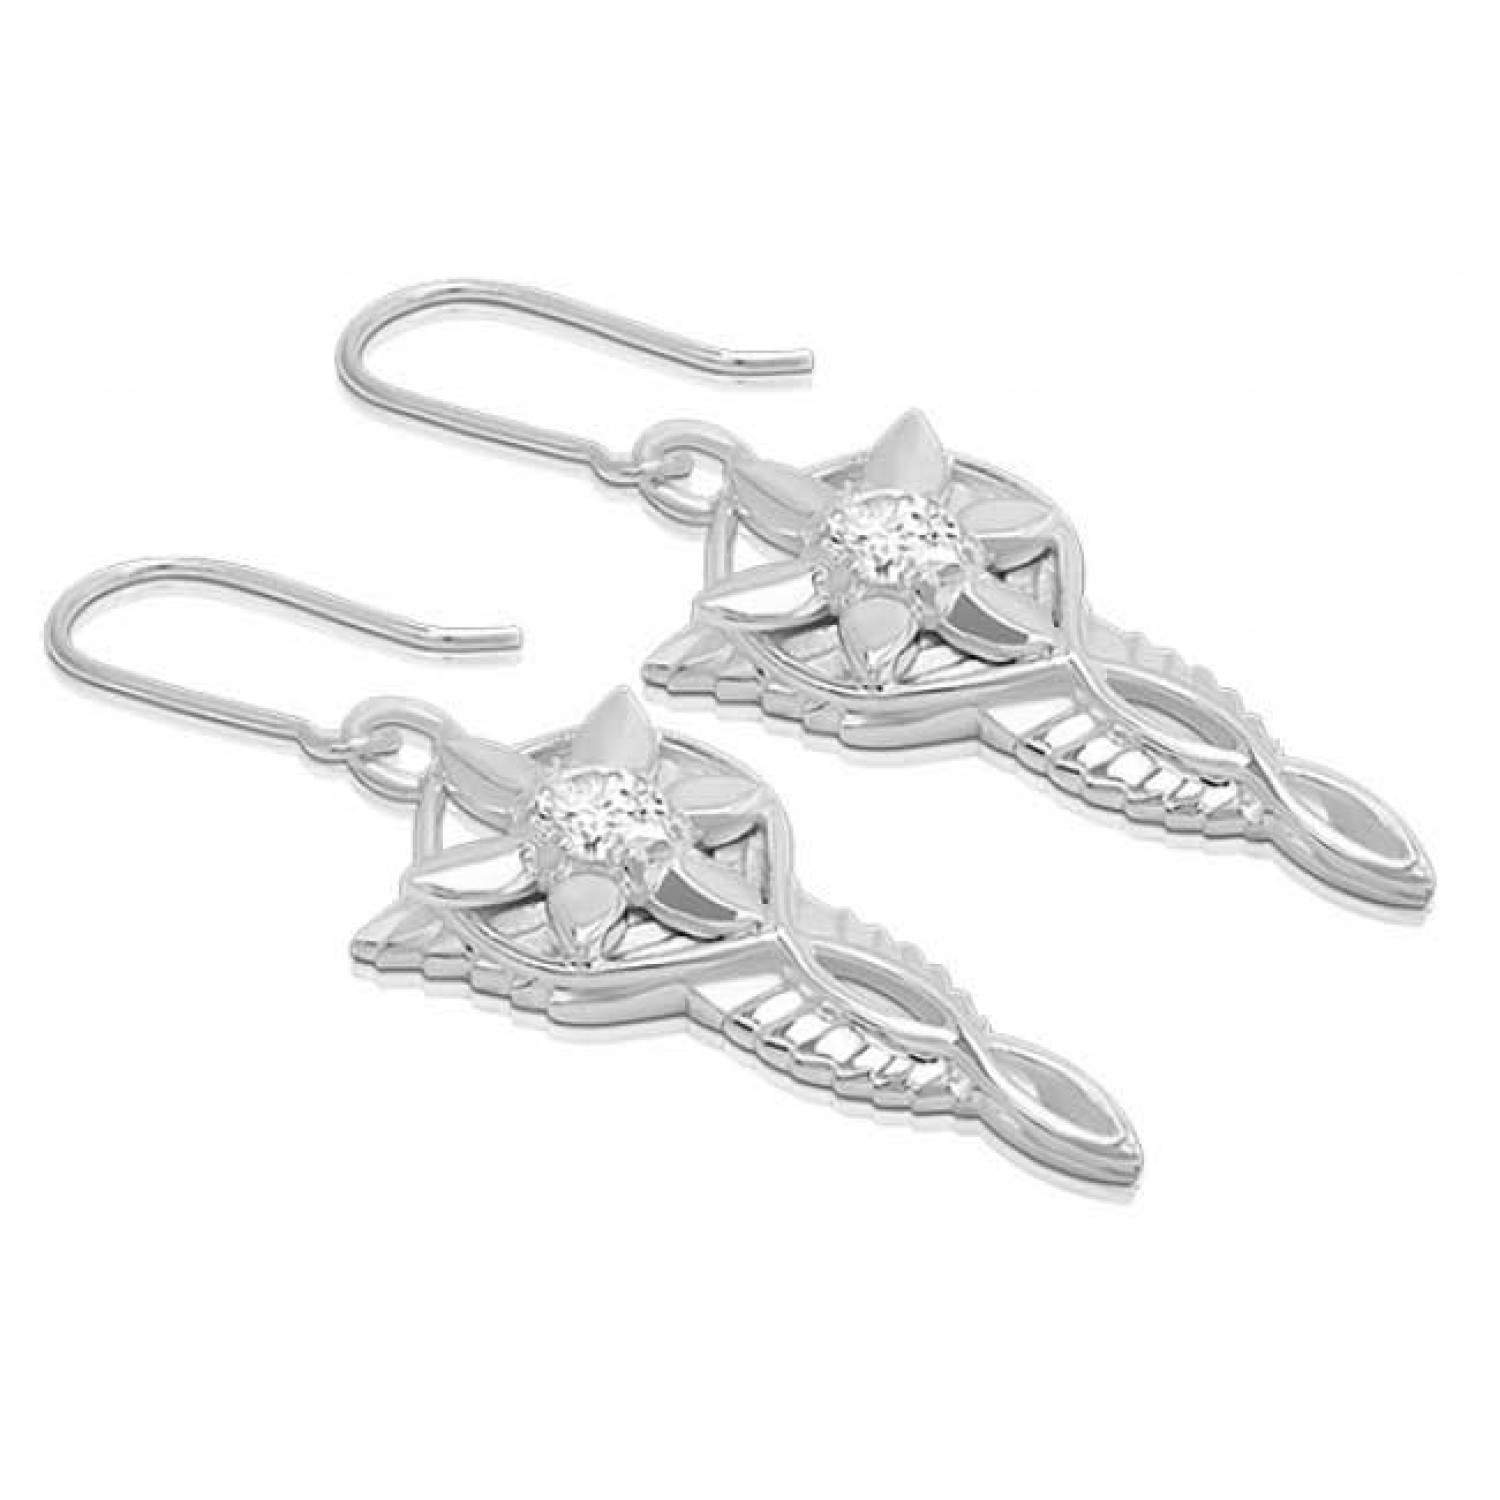 Lord of The Rings Official Arwens Evenstar Earrings. The Evenstar...and she took a white gem like a star that lay upon her breast hanging upon a silver chain... The Arwen Evenstar pendant was given to Aragorn by Arwen to show her eternal love... The penda